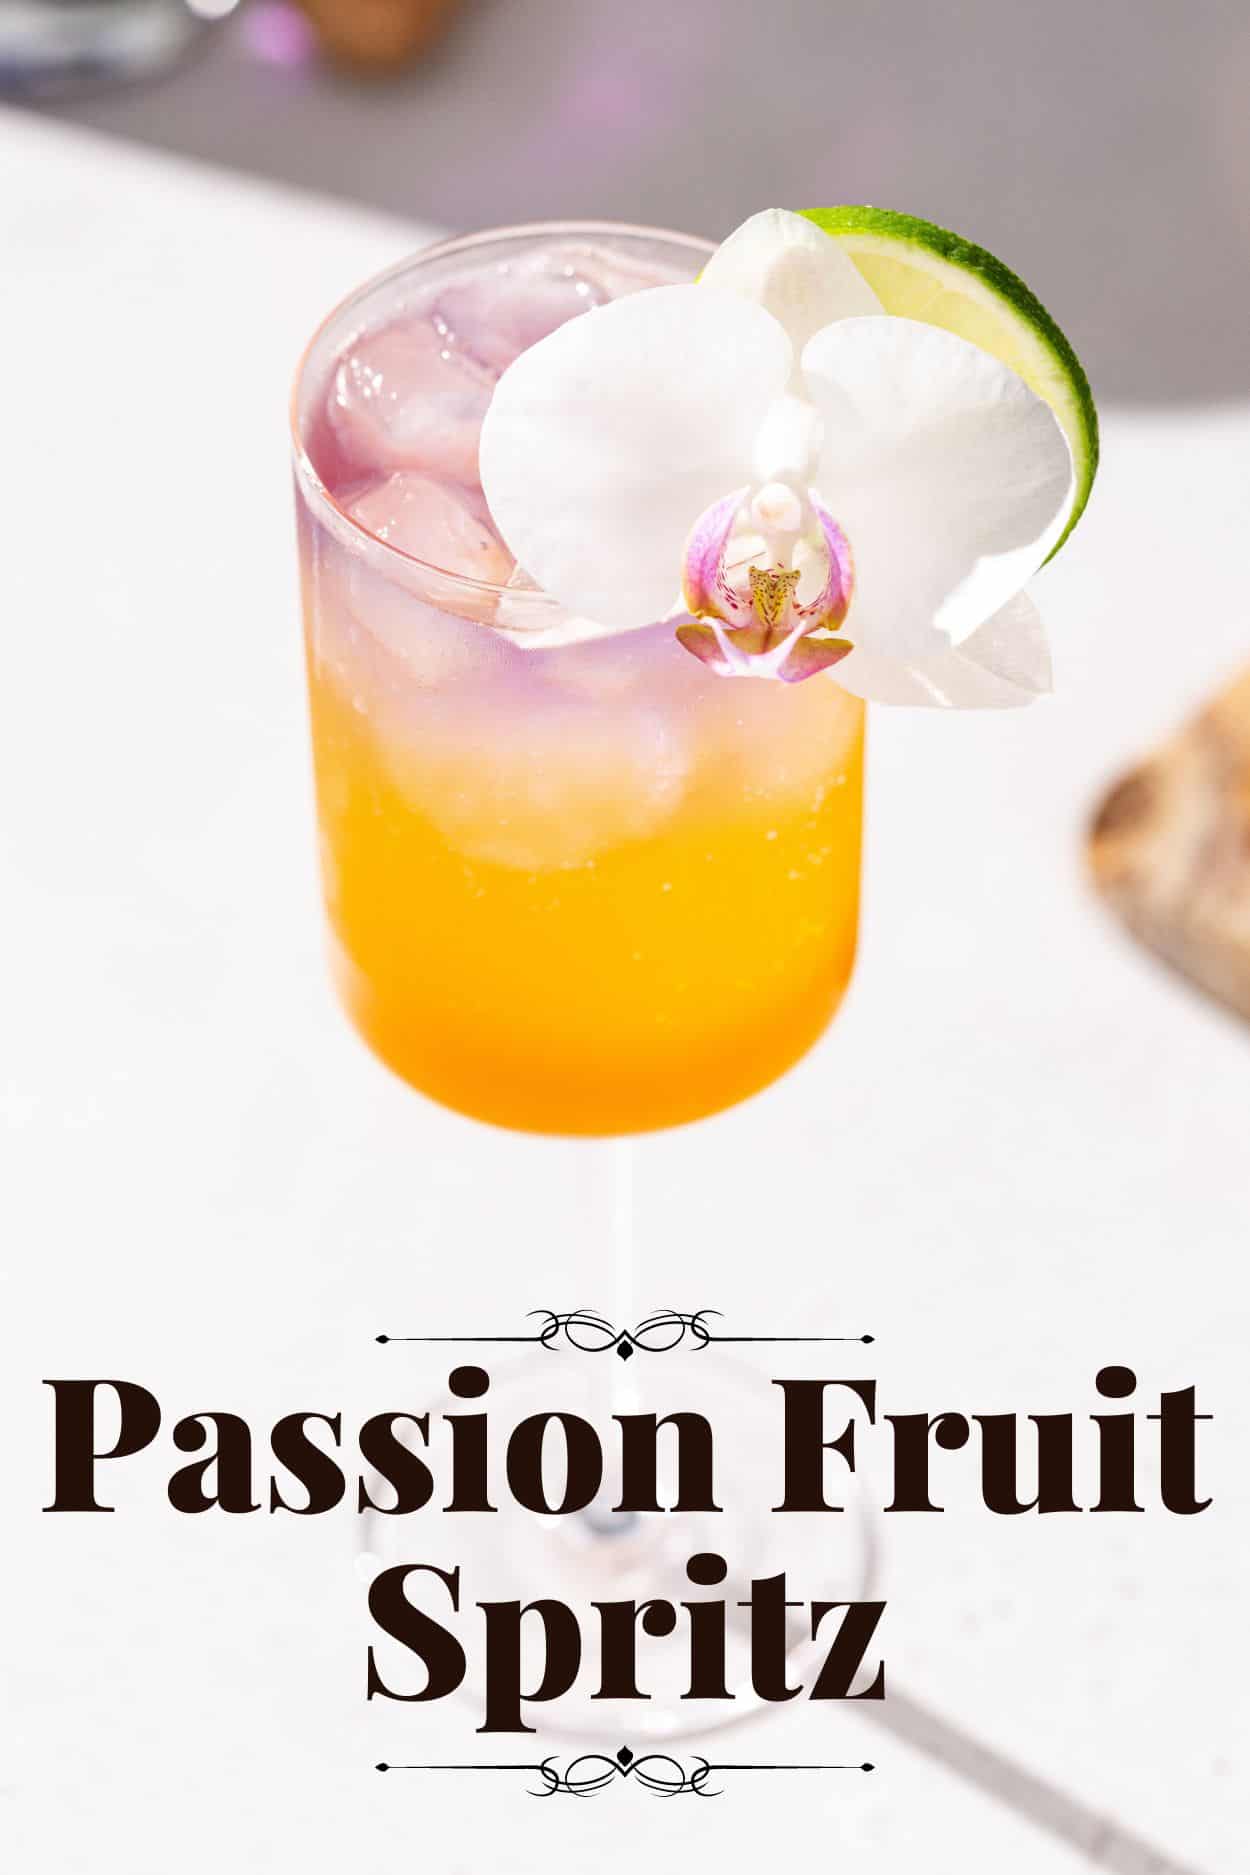 Top view of Passion Fruit Spritz cocktail, with a beautiful orchid and lime garnish. The drink is orange at the bottom with a purple color on top. Text at the bottom of the photo says “passion fruit Spritz”.